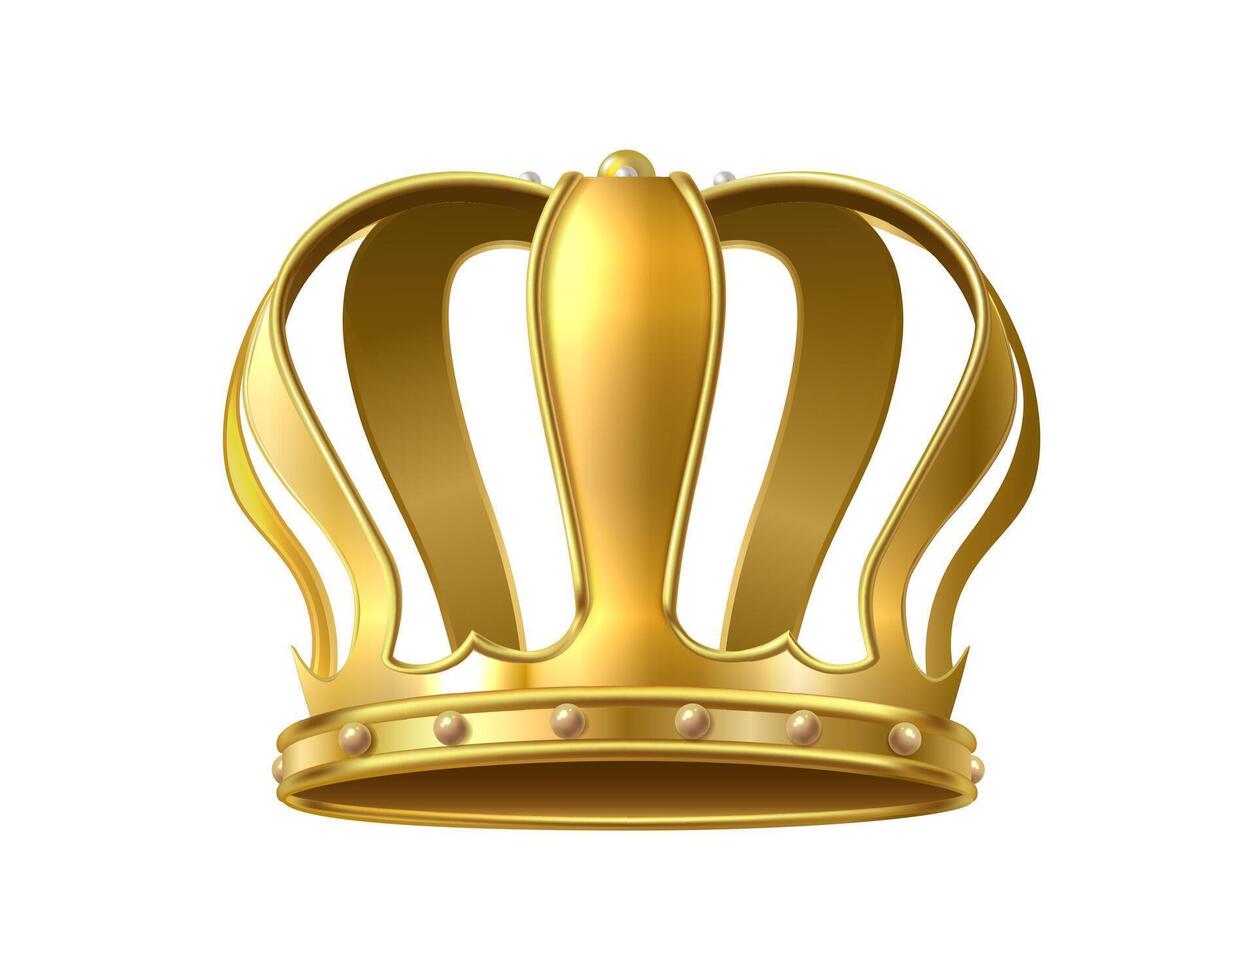 3d realistic vector icon. Golden king crown coronation monarchy symbol. Isolated on white background.